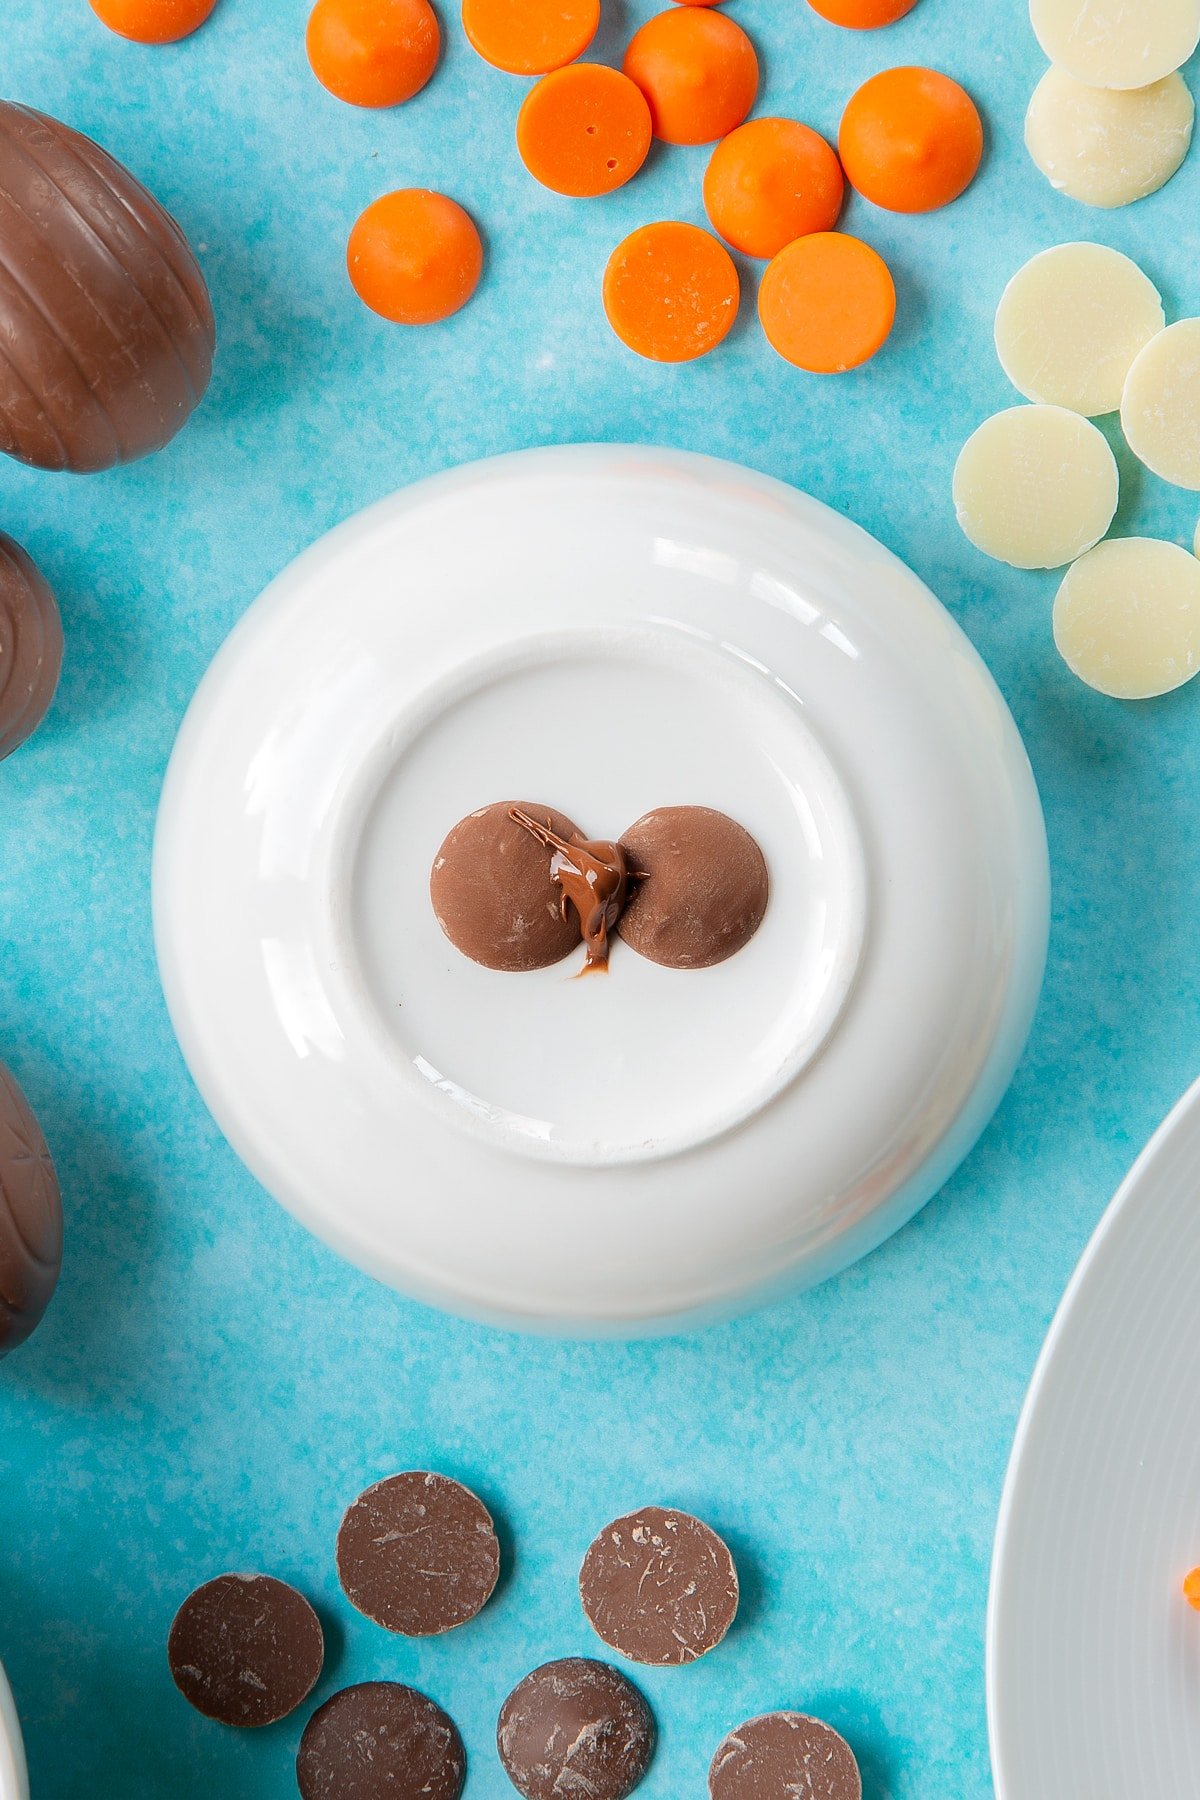 Two chocolate buttons topped with a little melted chocolate sit on an upturned white bowl, surrounded by ingredients to make chocolate chicks.